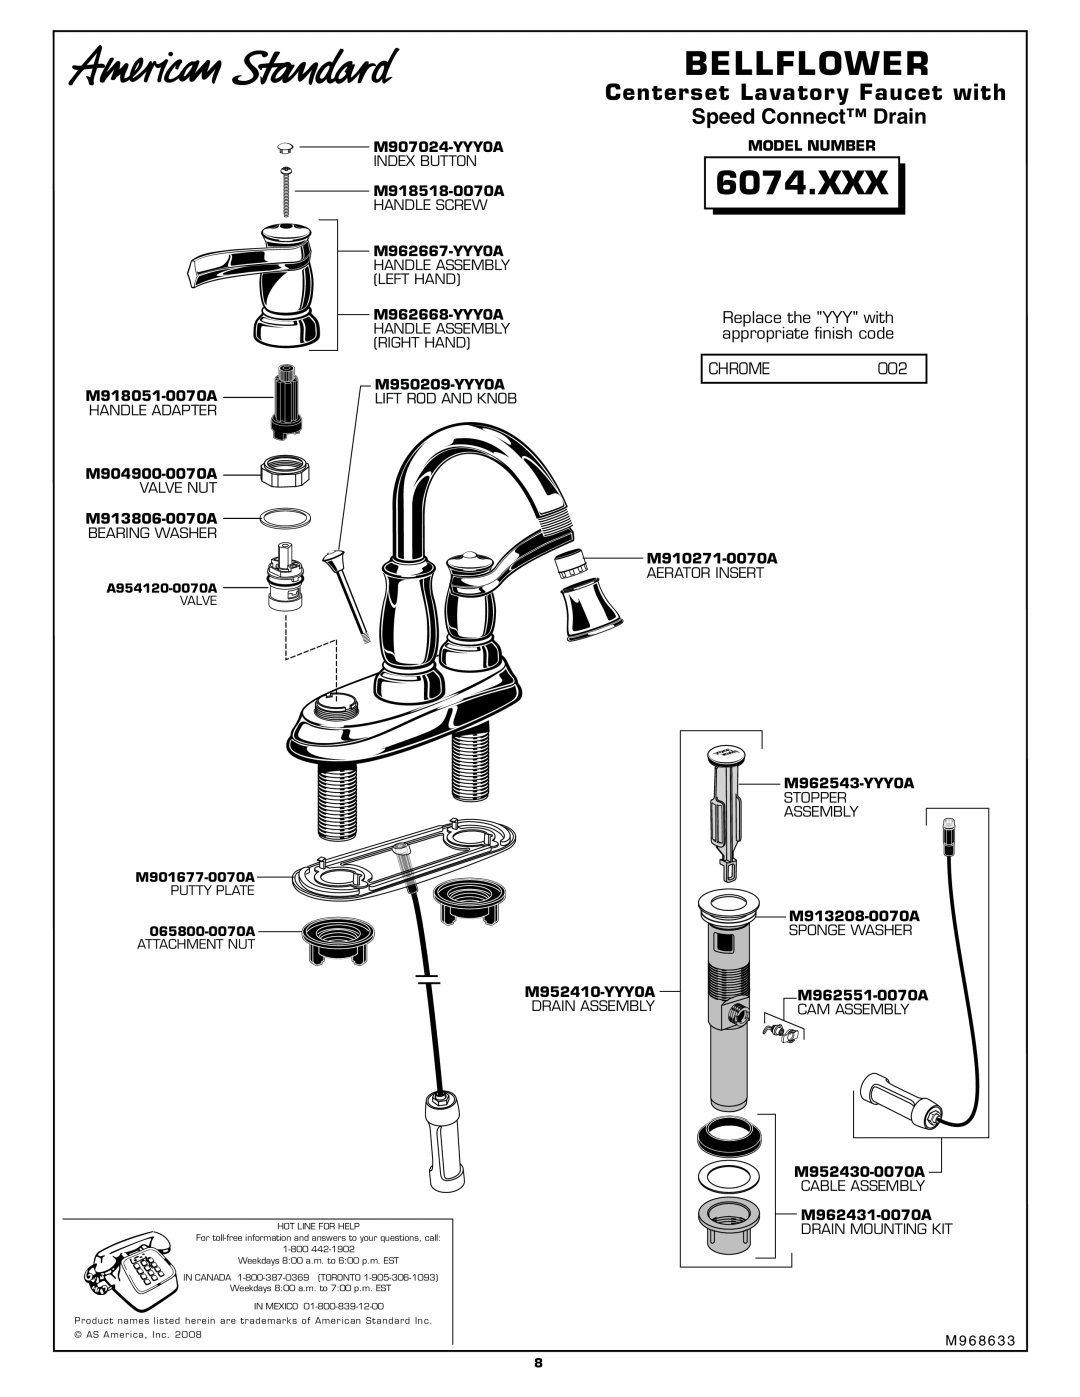 American Standard 6074.XXX Bellflower, Centerset Lavatory Faucet with, Speed Connect Drain, CHROME002 